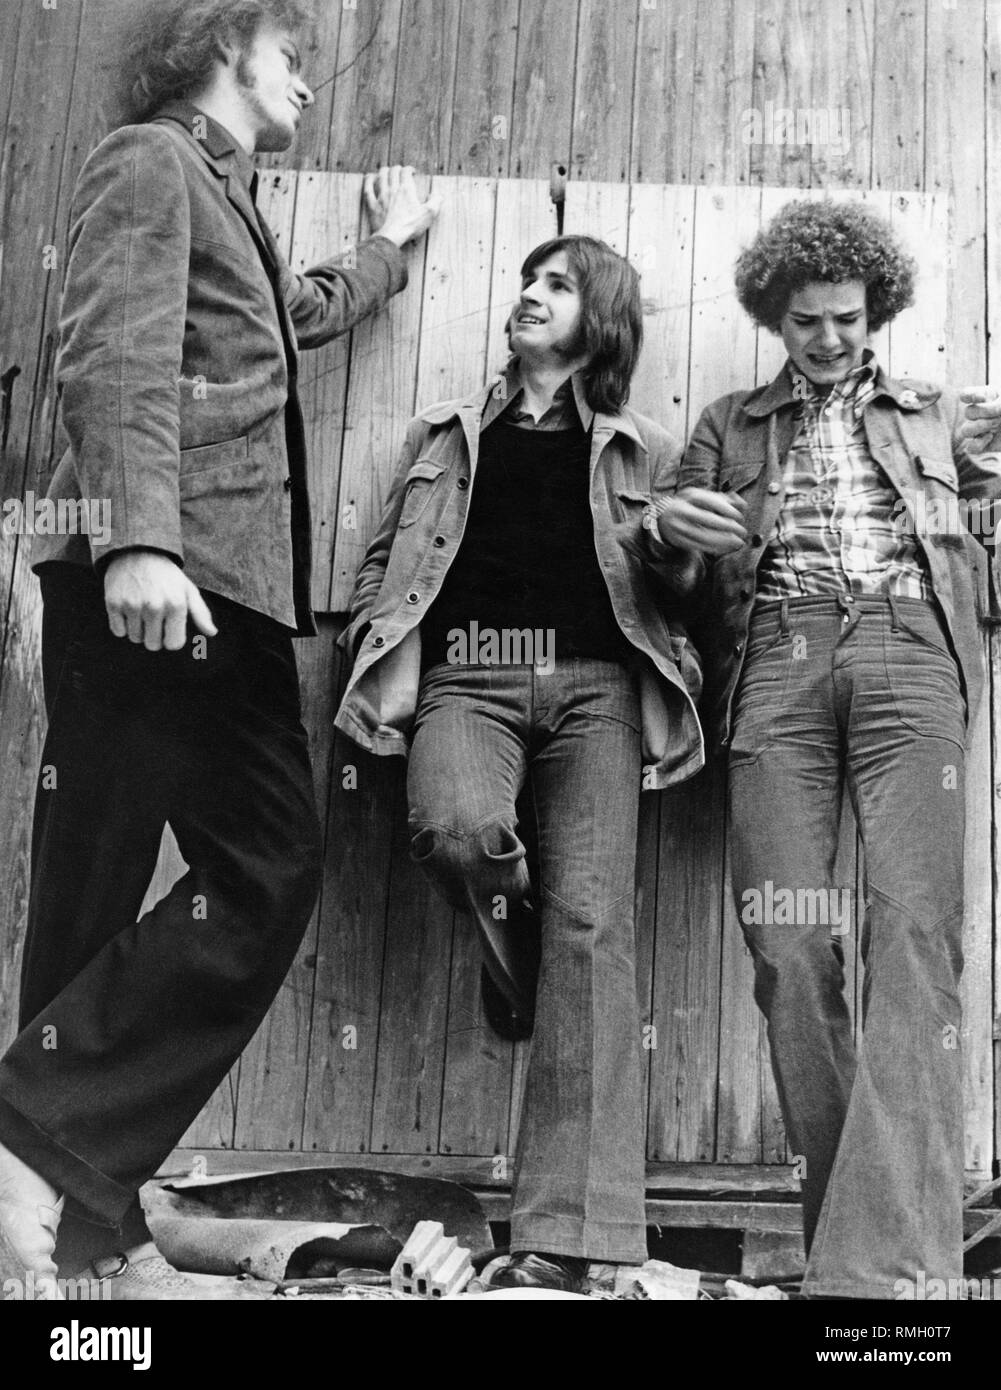 Three teenagers, wearing bell bottoms, lean against a wooden wall. Stock Photo